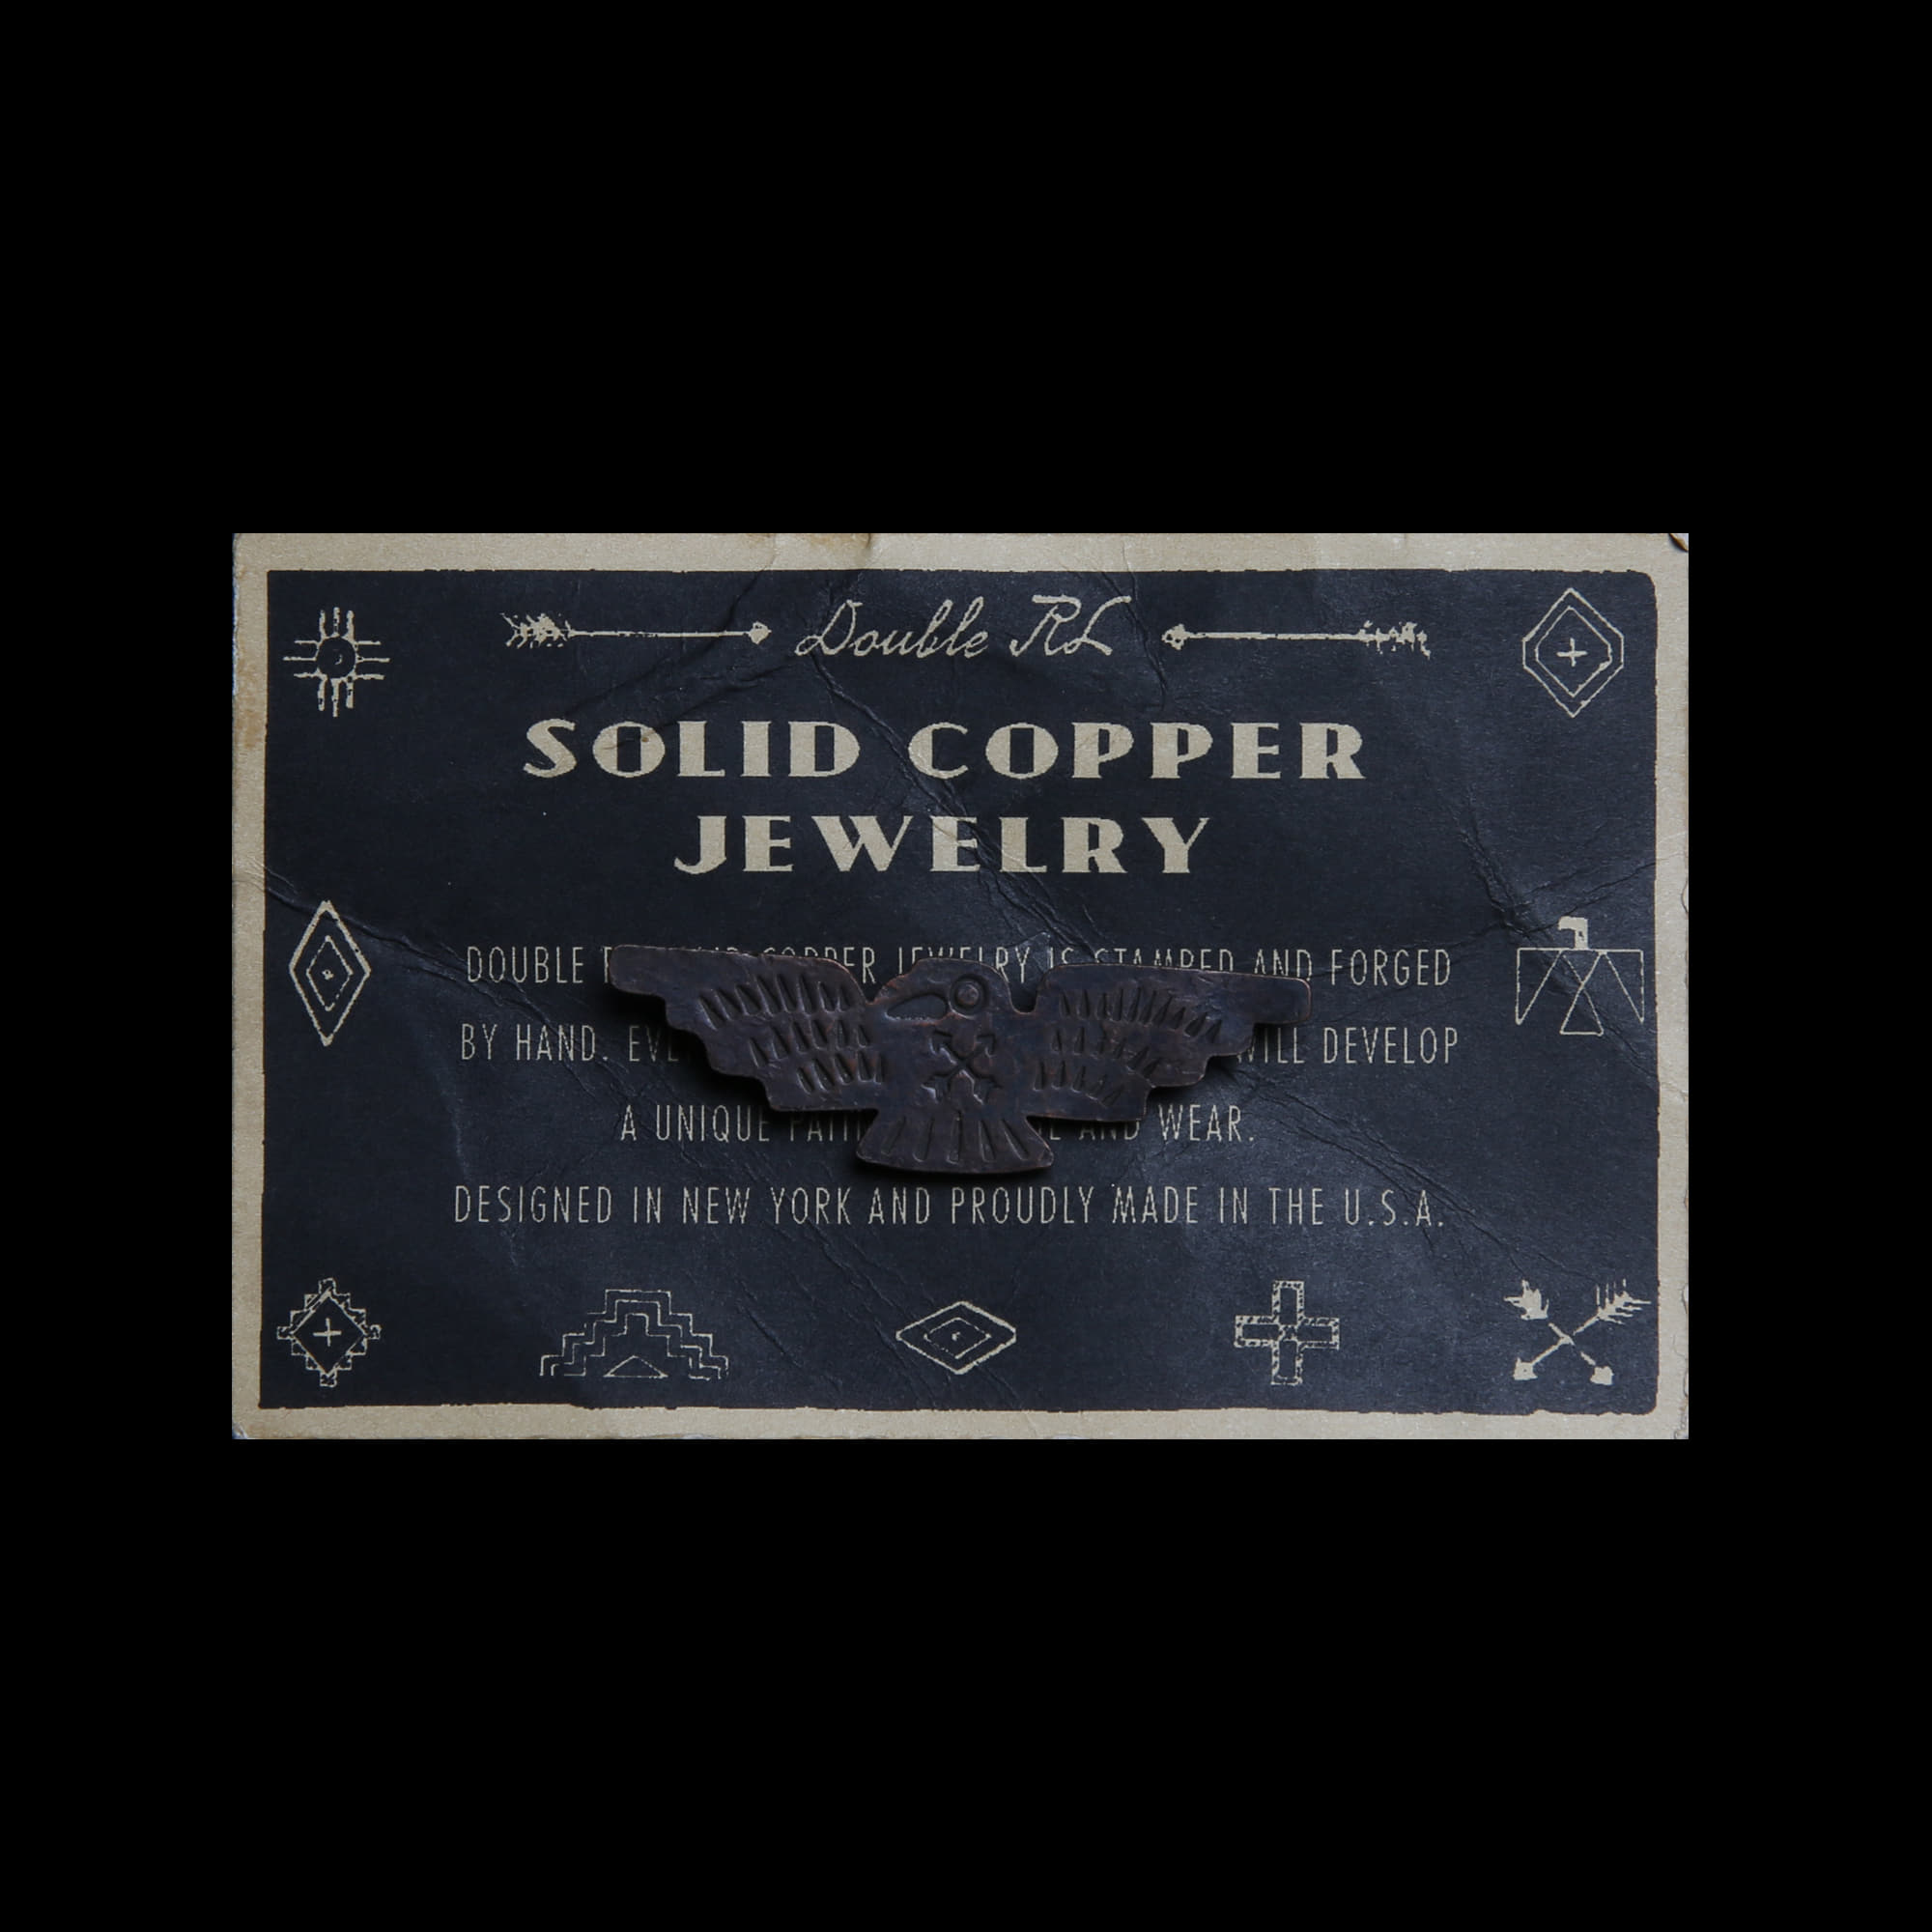 RRLSOLID COPPERJEWELRY